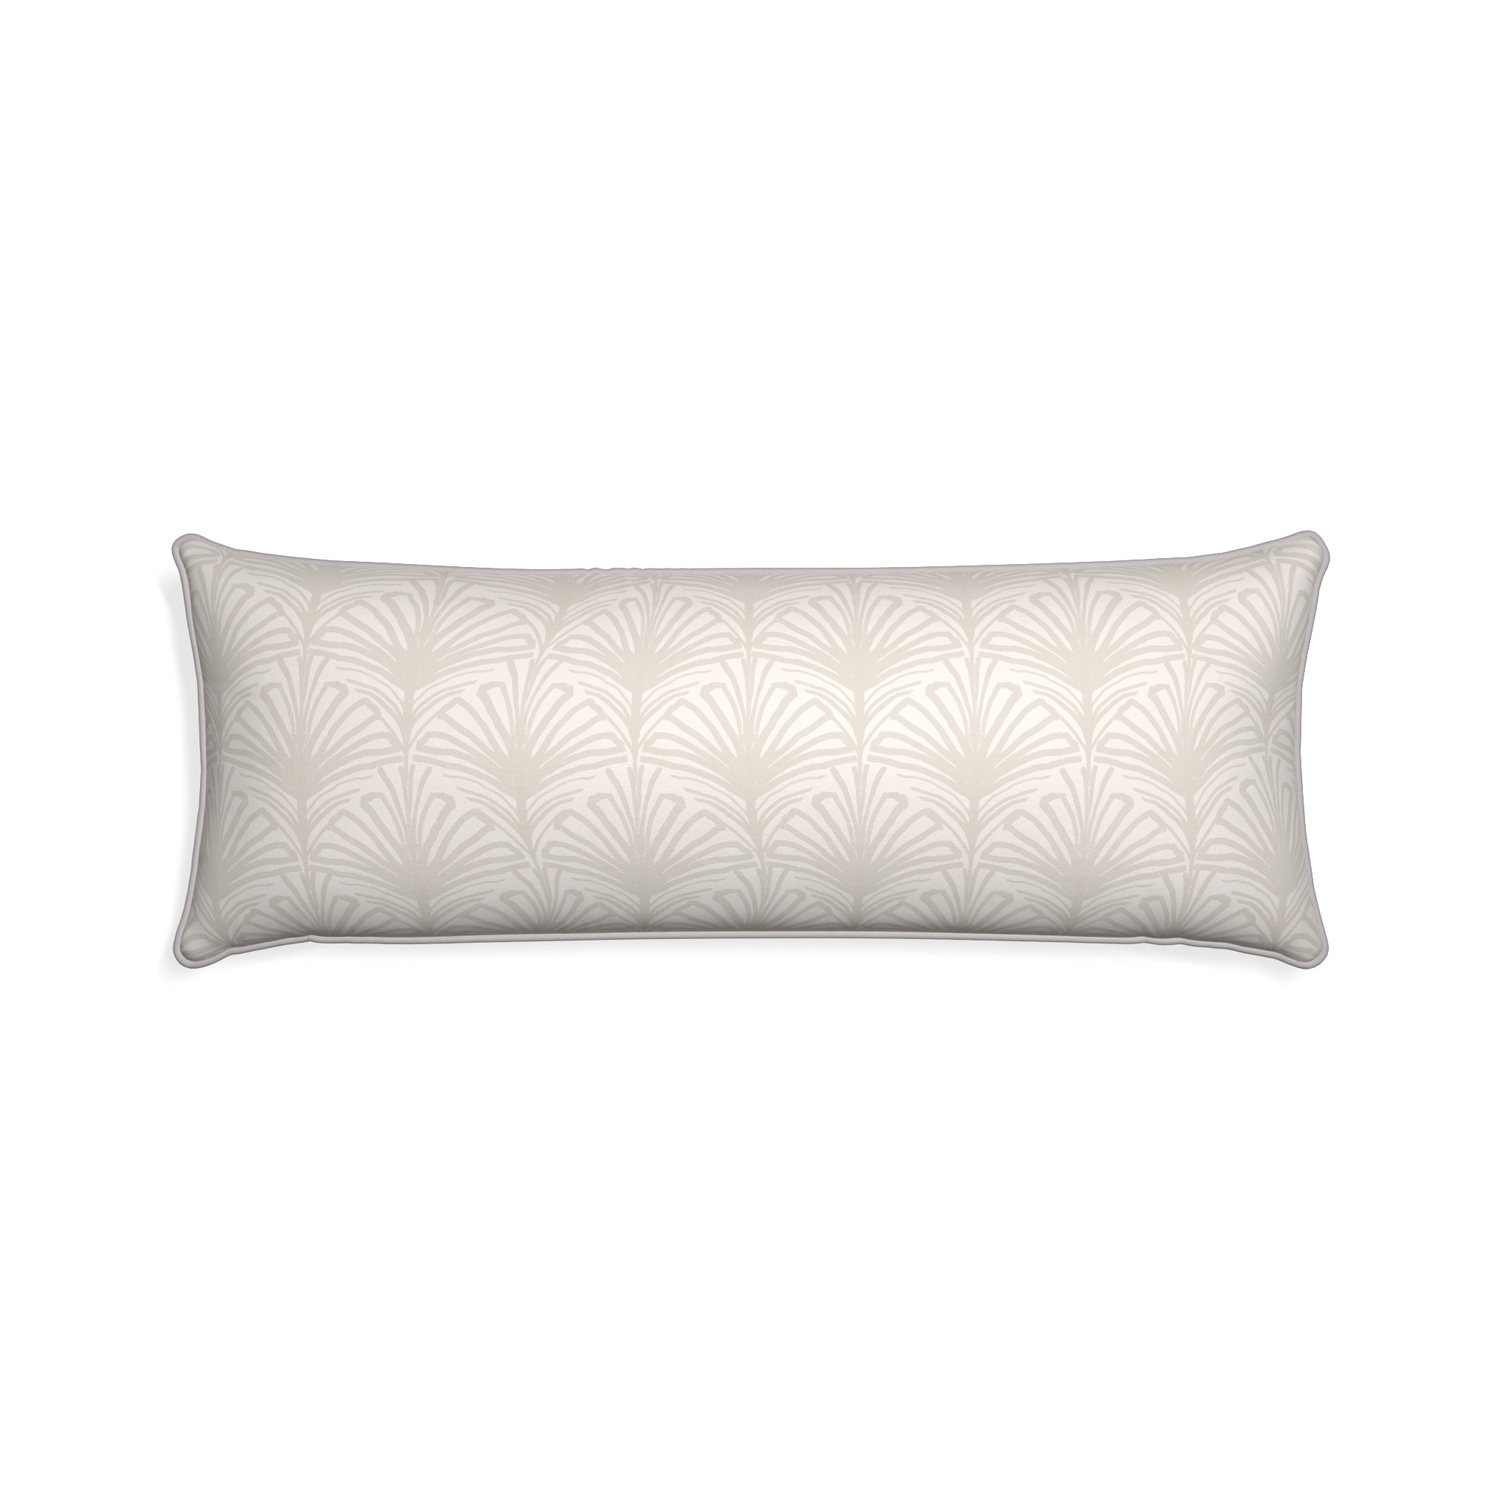 Xl-lumbar suzy sand custom pillow with pebble piping on white background